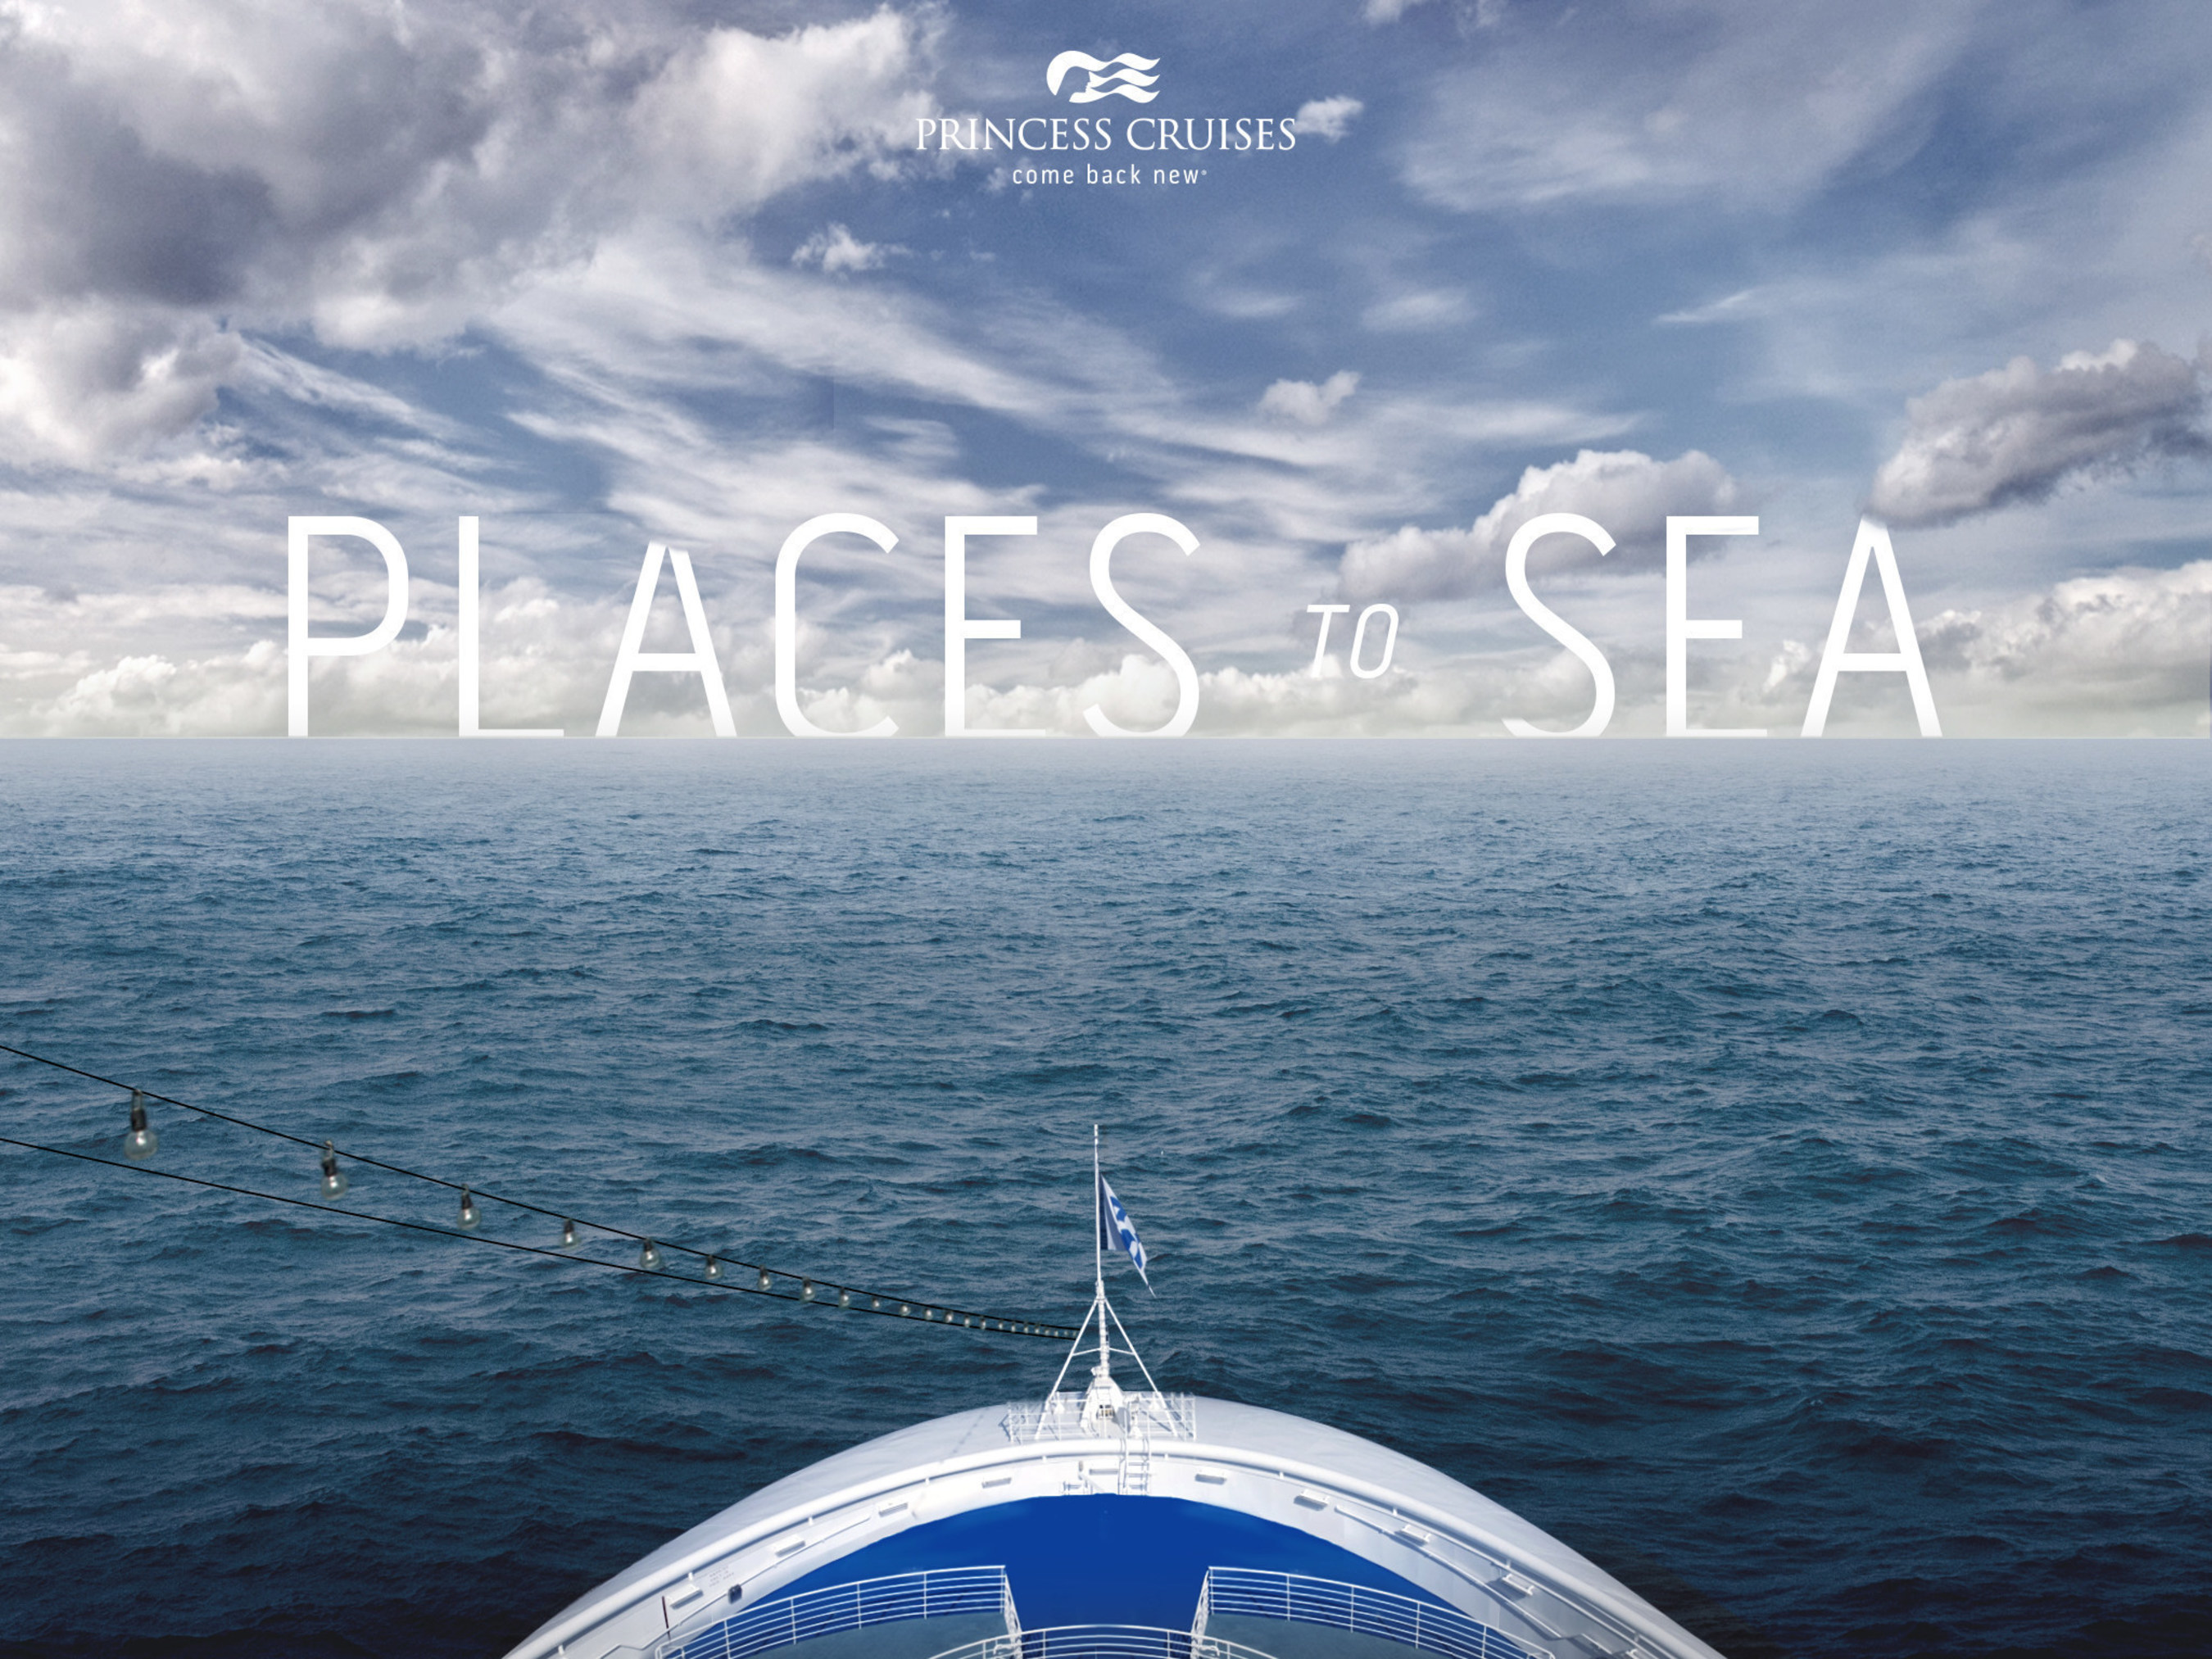 Princess Cruises debuts Places to Sea, a new interactive mobile experience.